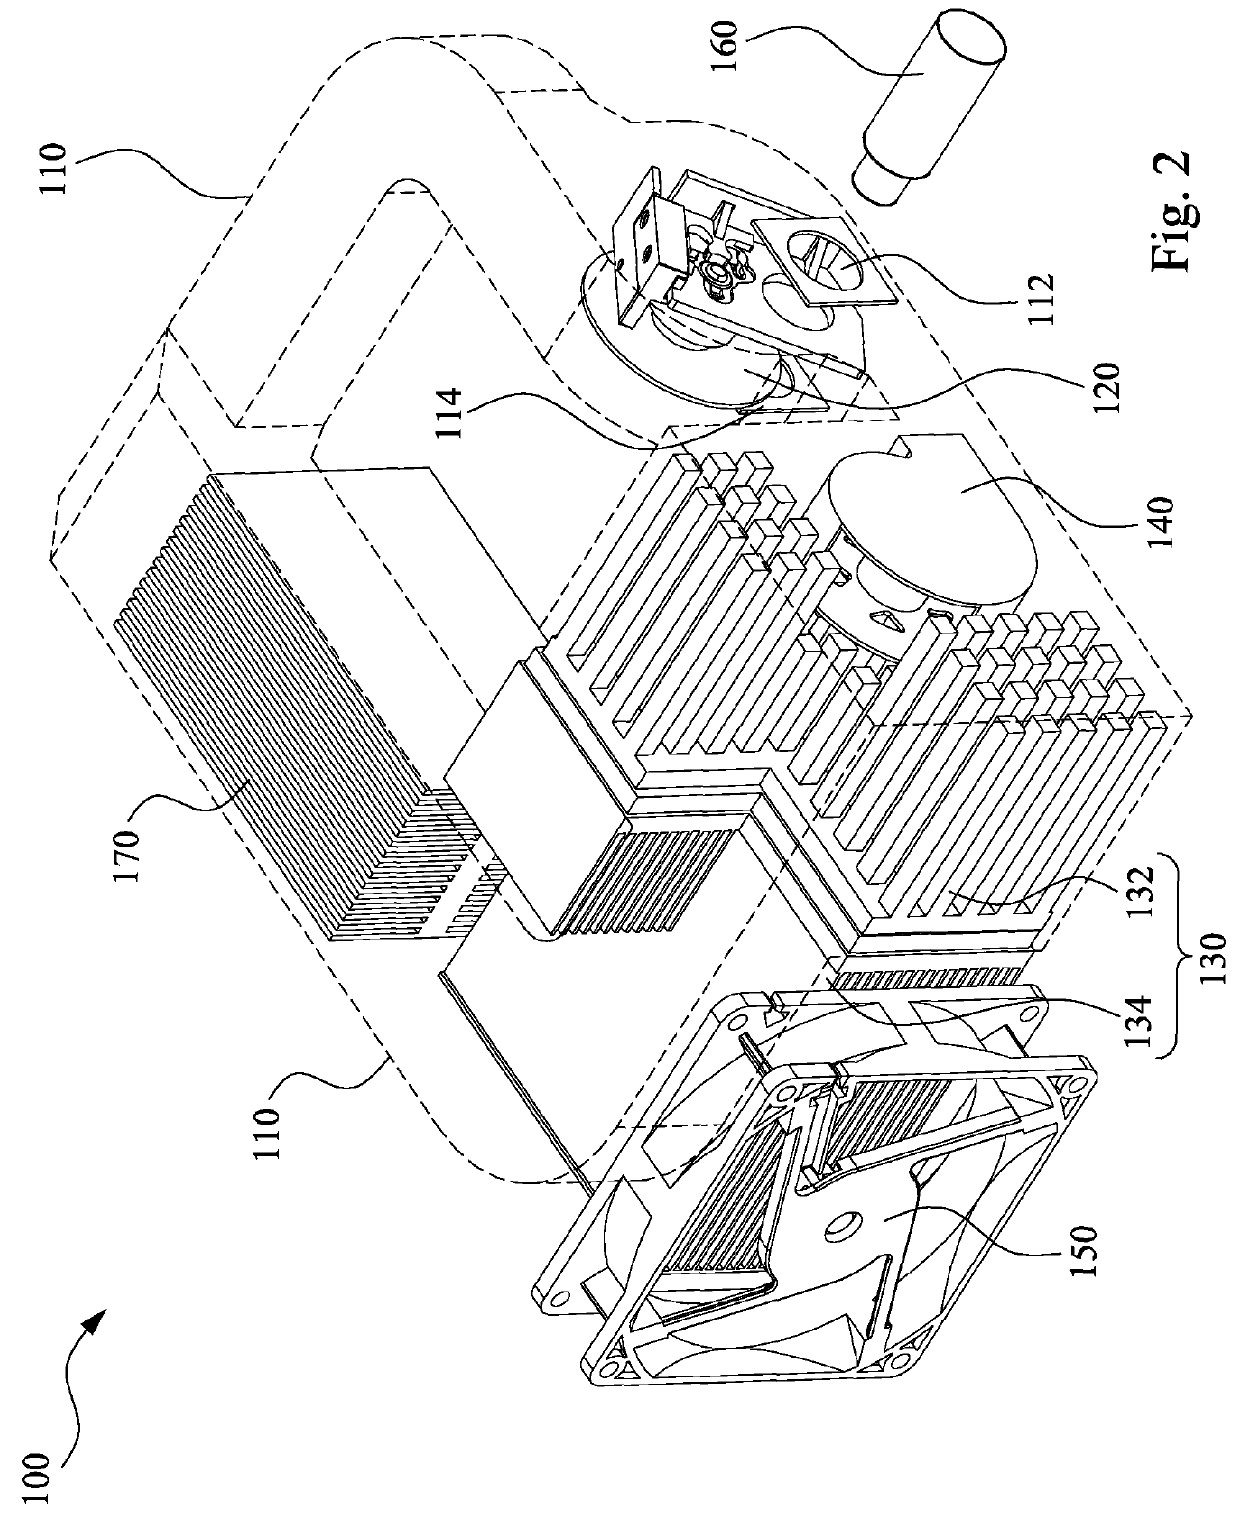 Optical device utilized in laser projector